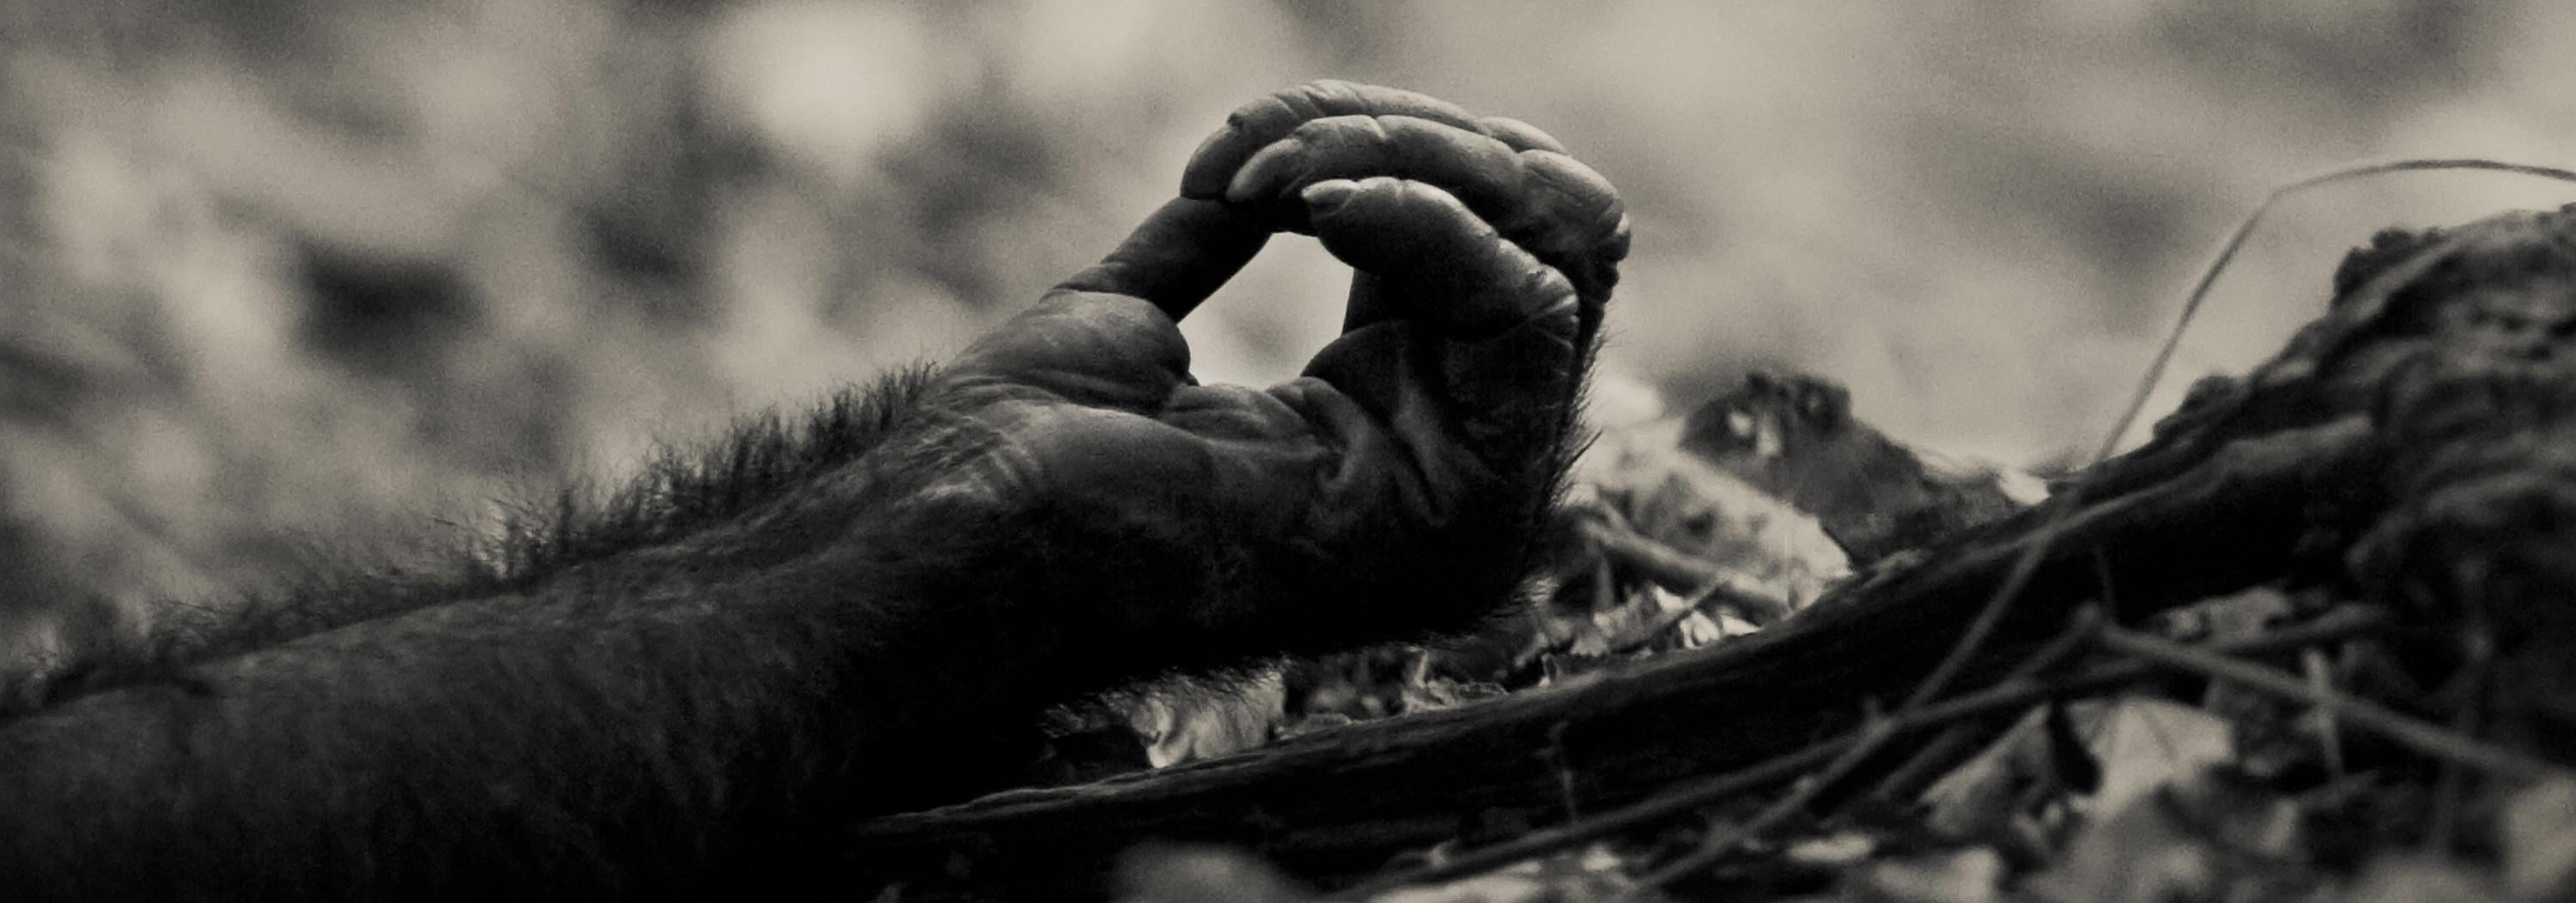 'MAHALE CHIMP, ' Black and White Archival Giclee Photograph by  Nicol Ragland. 1